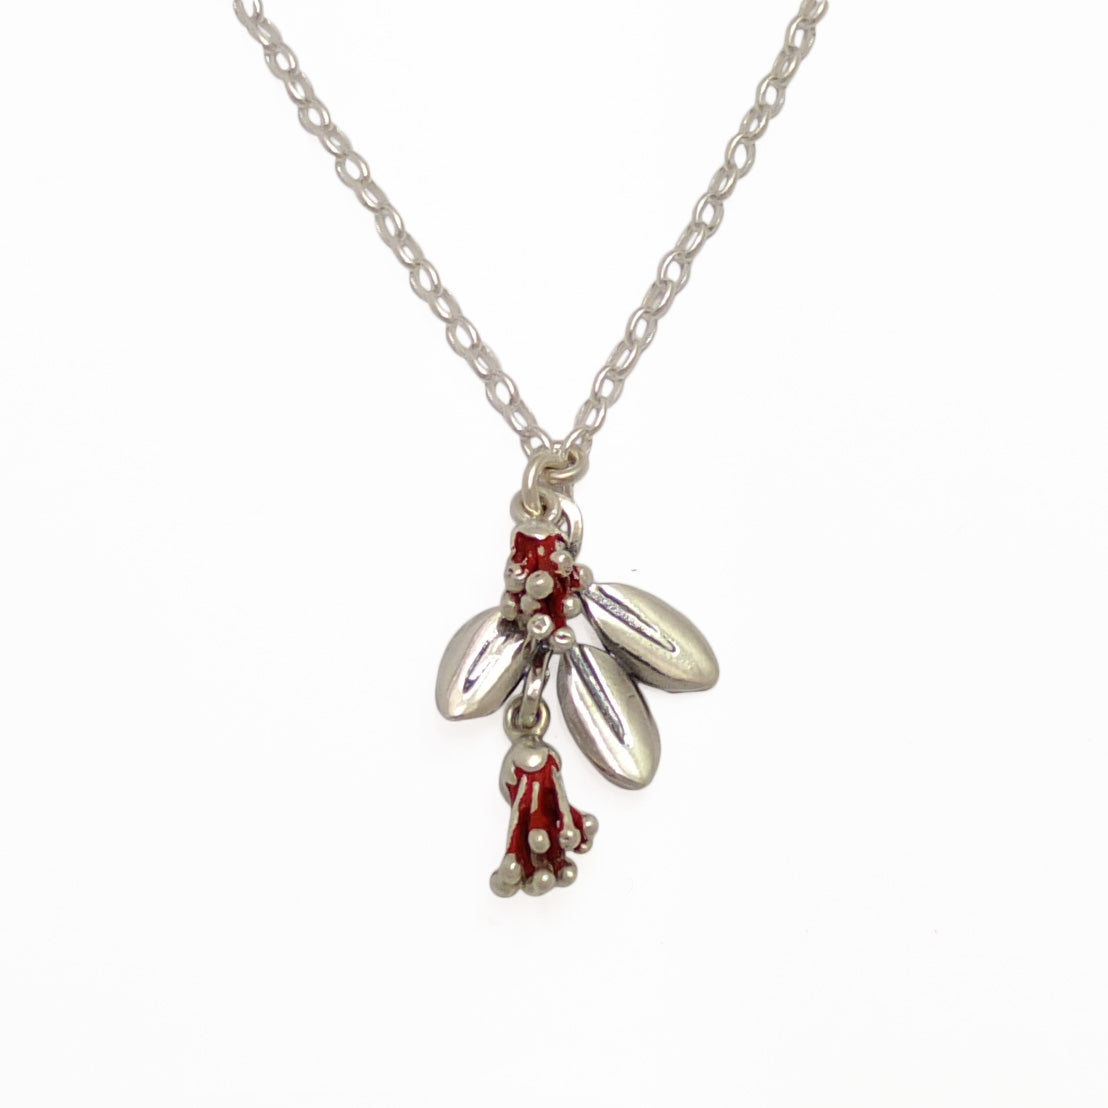 Pohutukawa Blossom and leaf  Sterling Silver Necklace by Martyn Milligan Rinopai Golden Bay